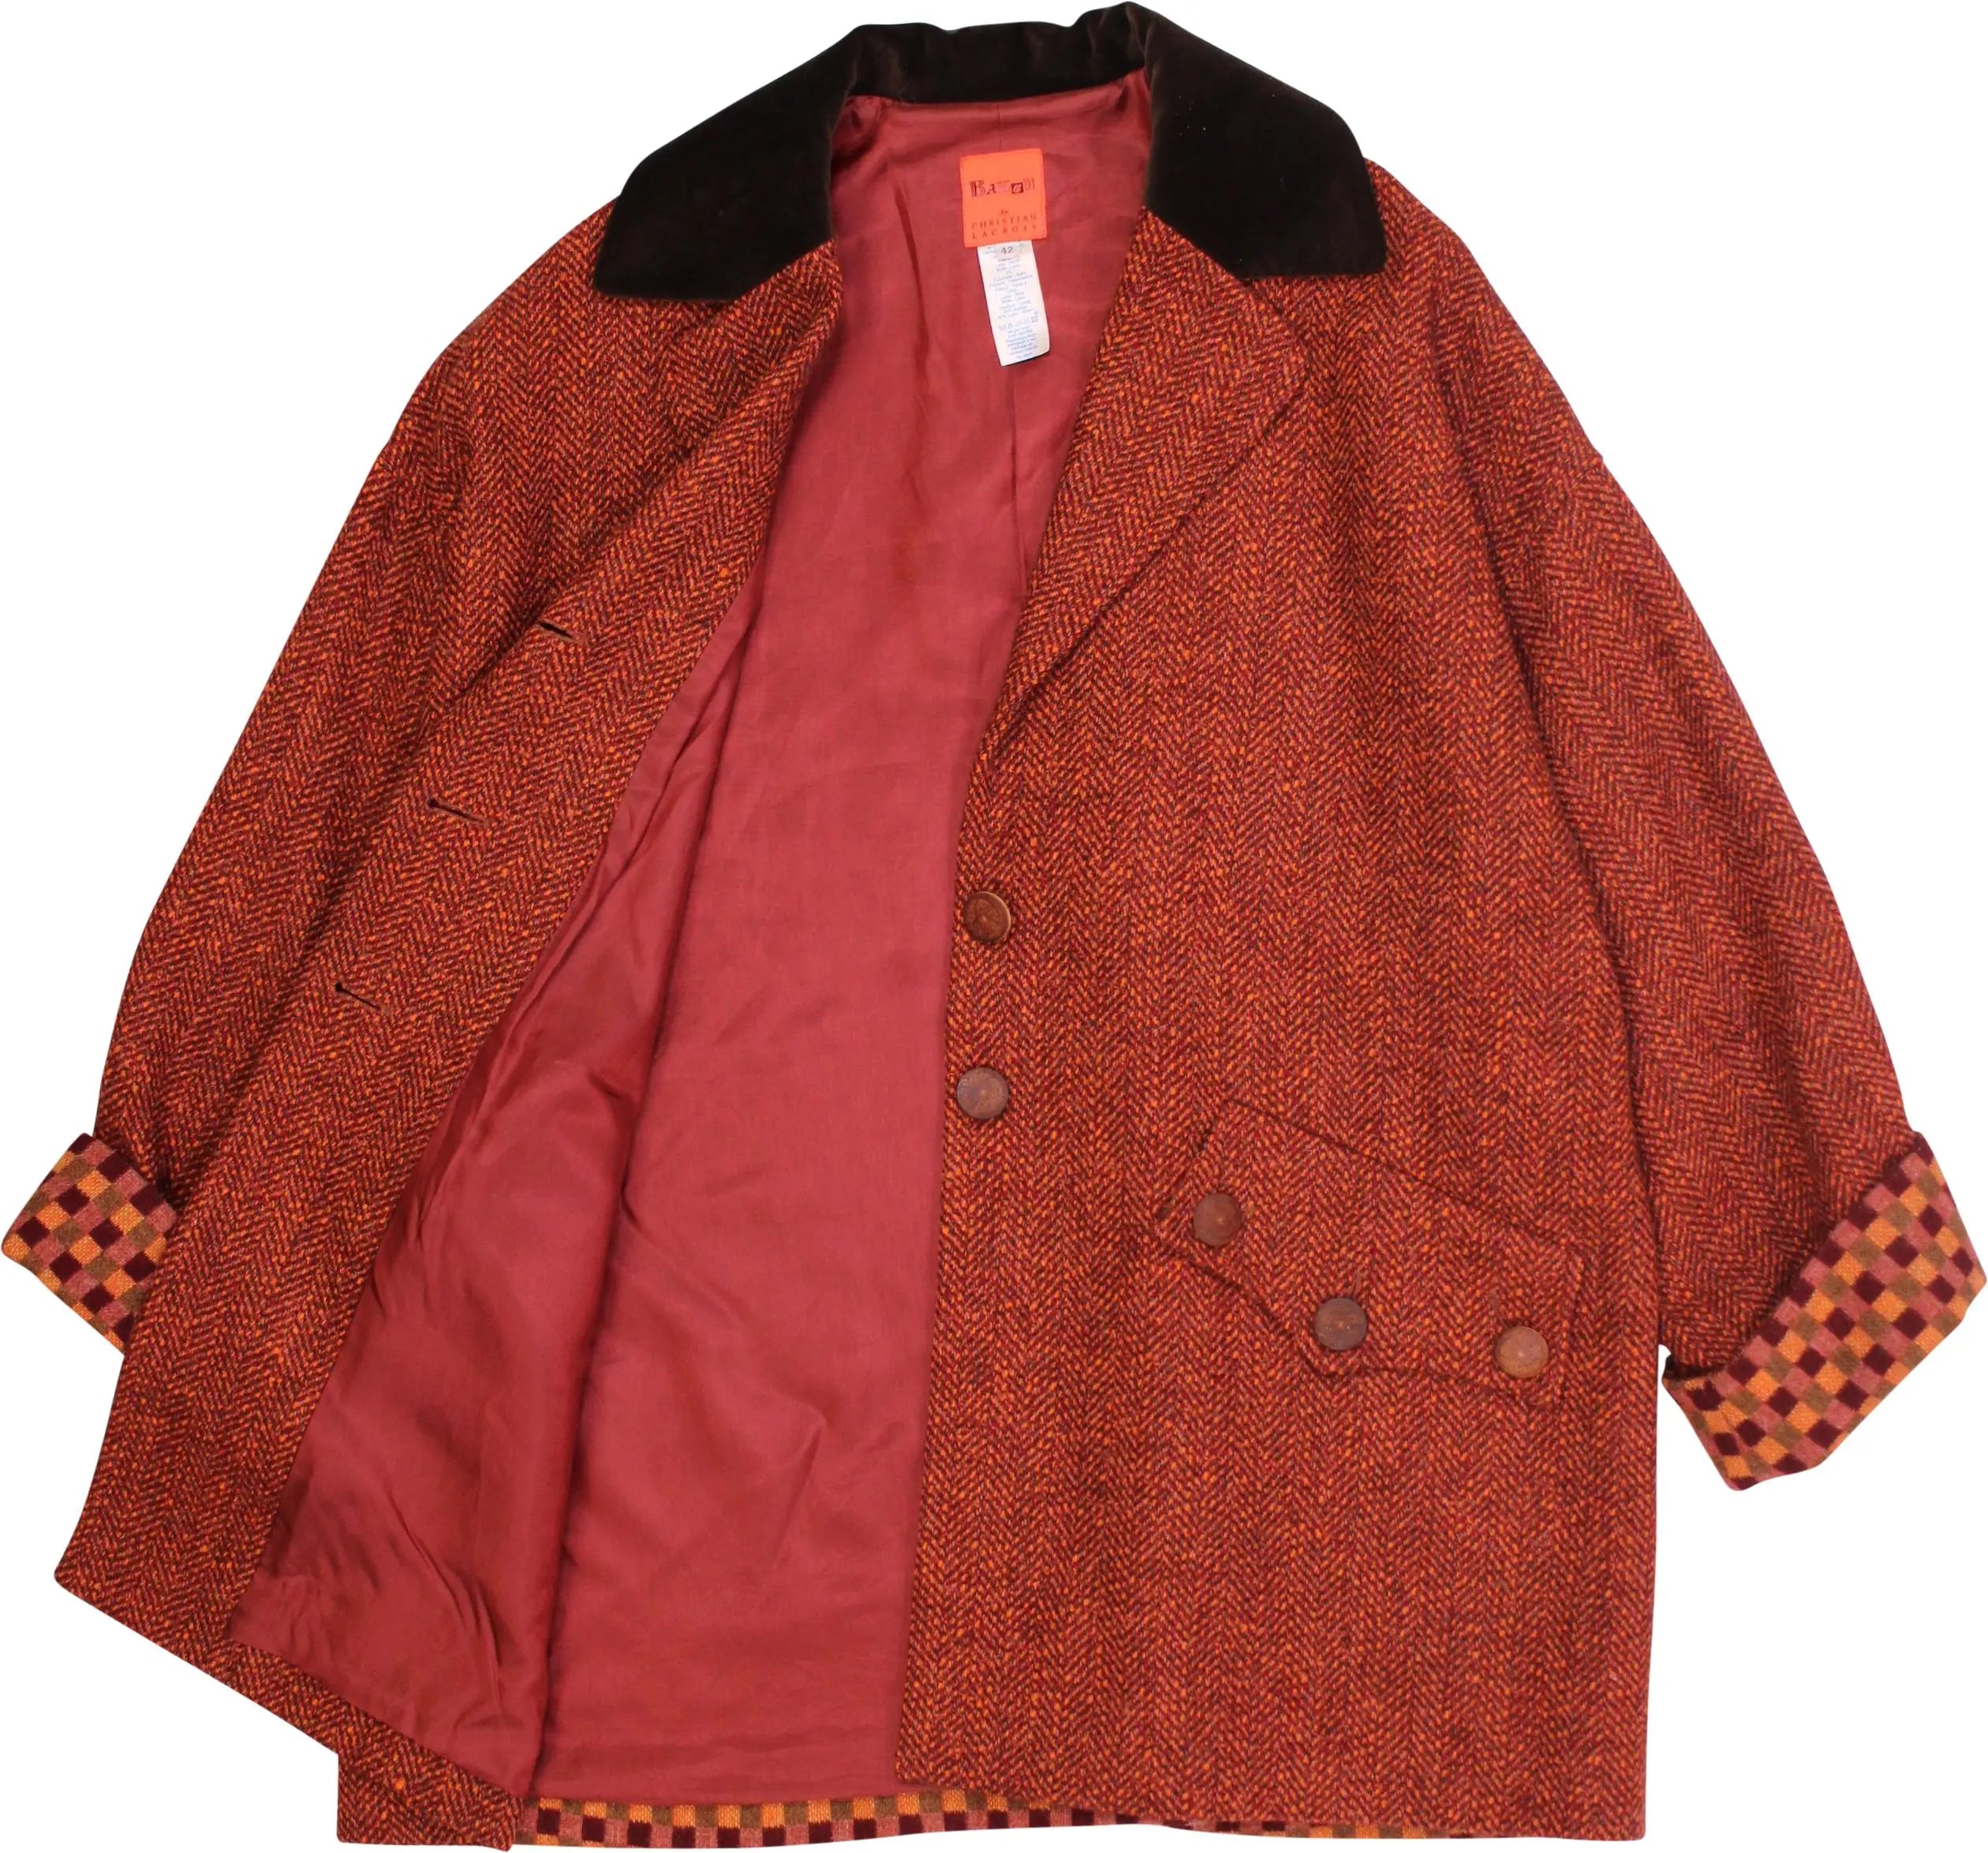 Bazar by Christian Lacroix - Colourful Wool Coat by Christian Lacroix- ThriftTale.com - Vintage and second handclothing